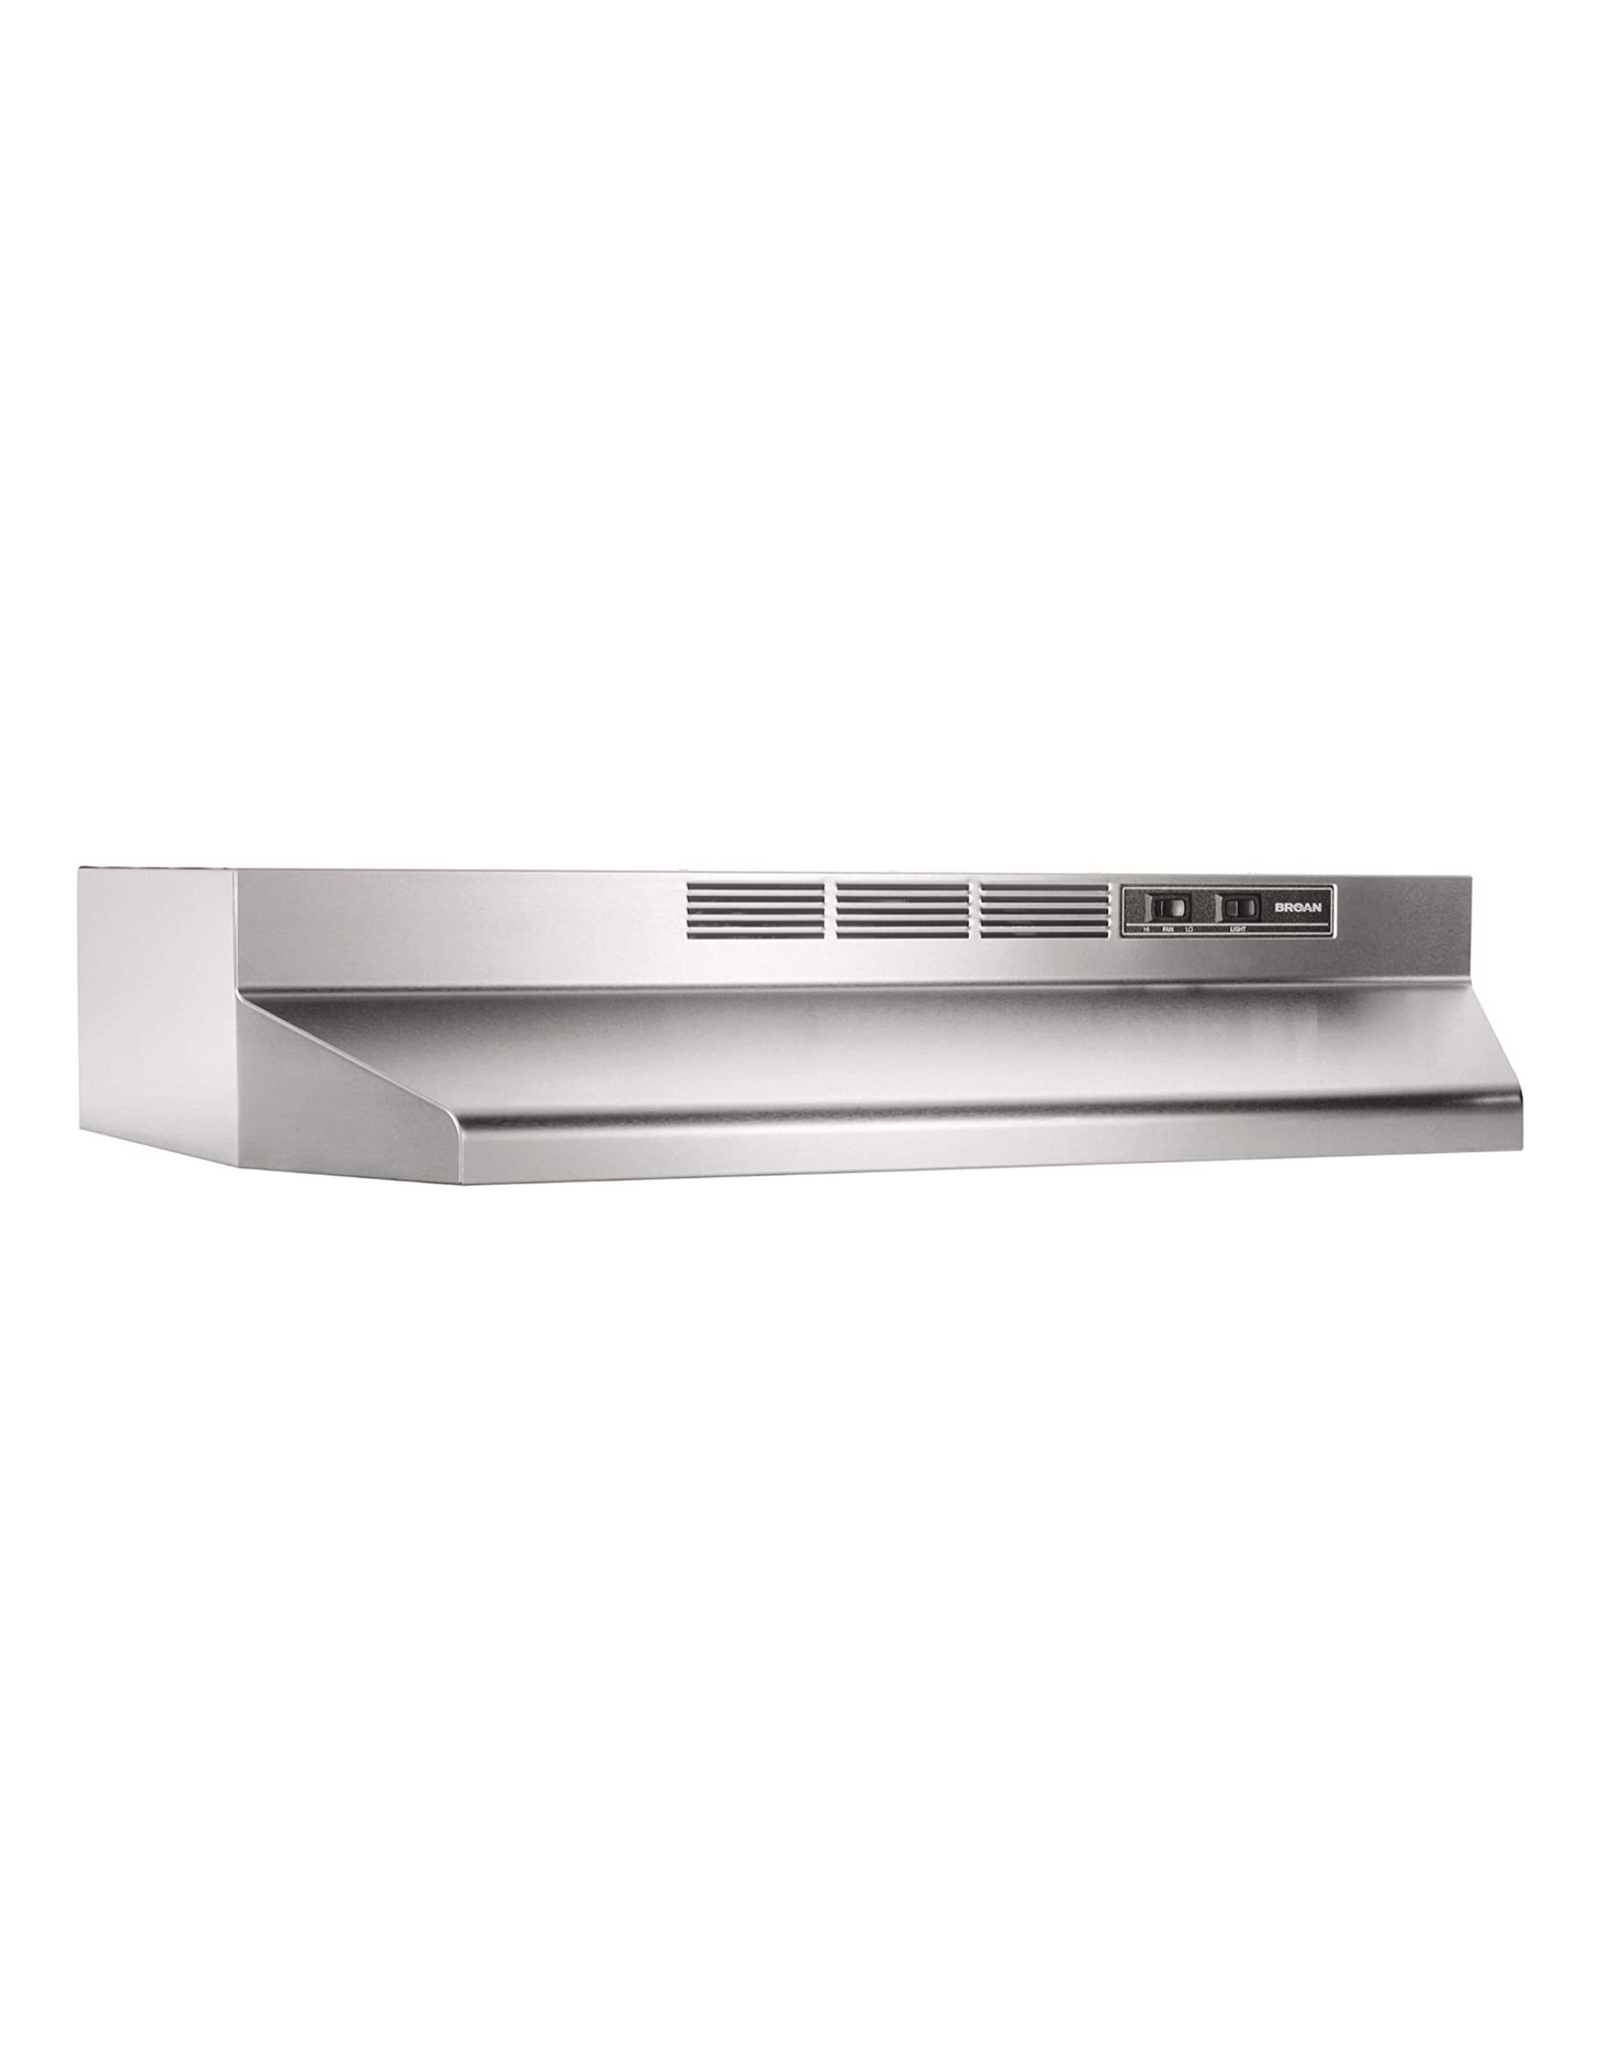 Broan-NuTone 413604 Non-Ducted Ductless Range Hood with Light, Exhaust Fan, 36", Stainless Steel